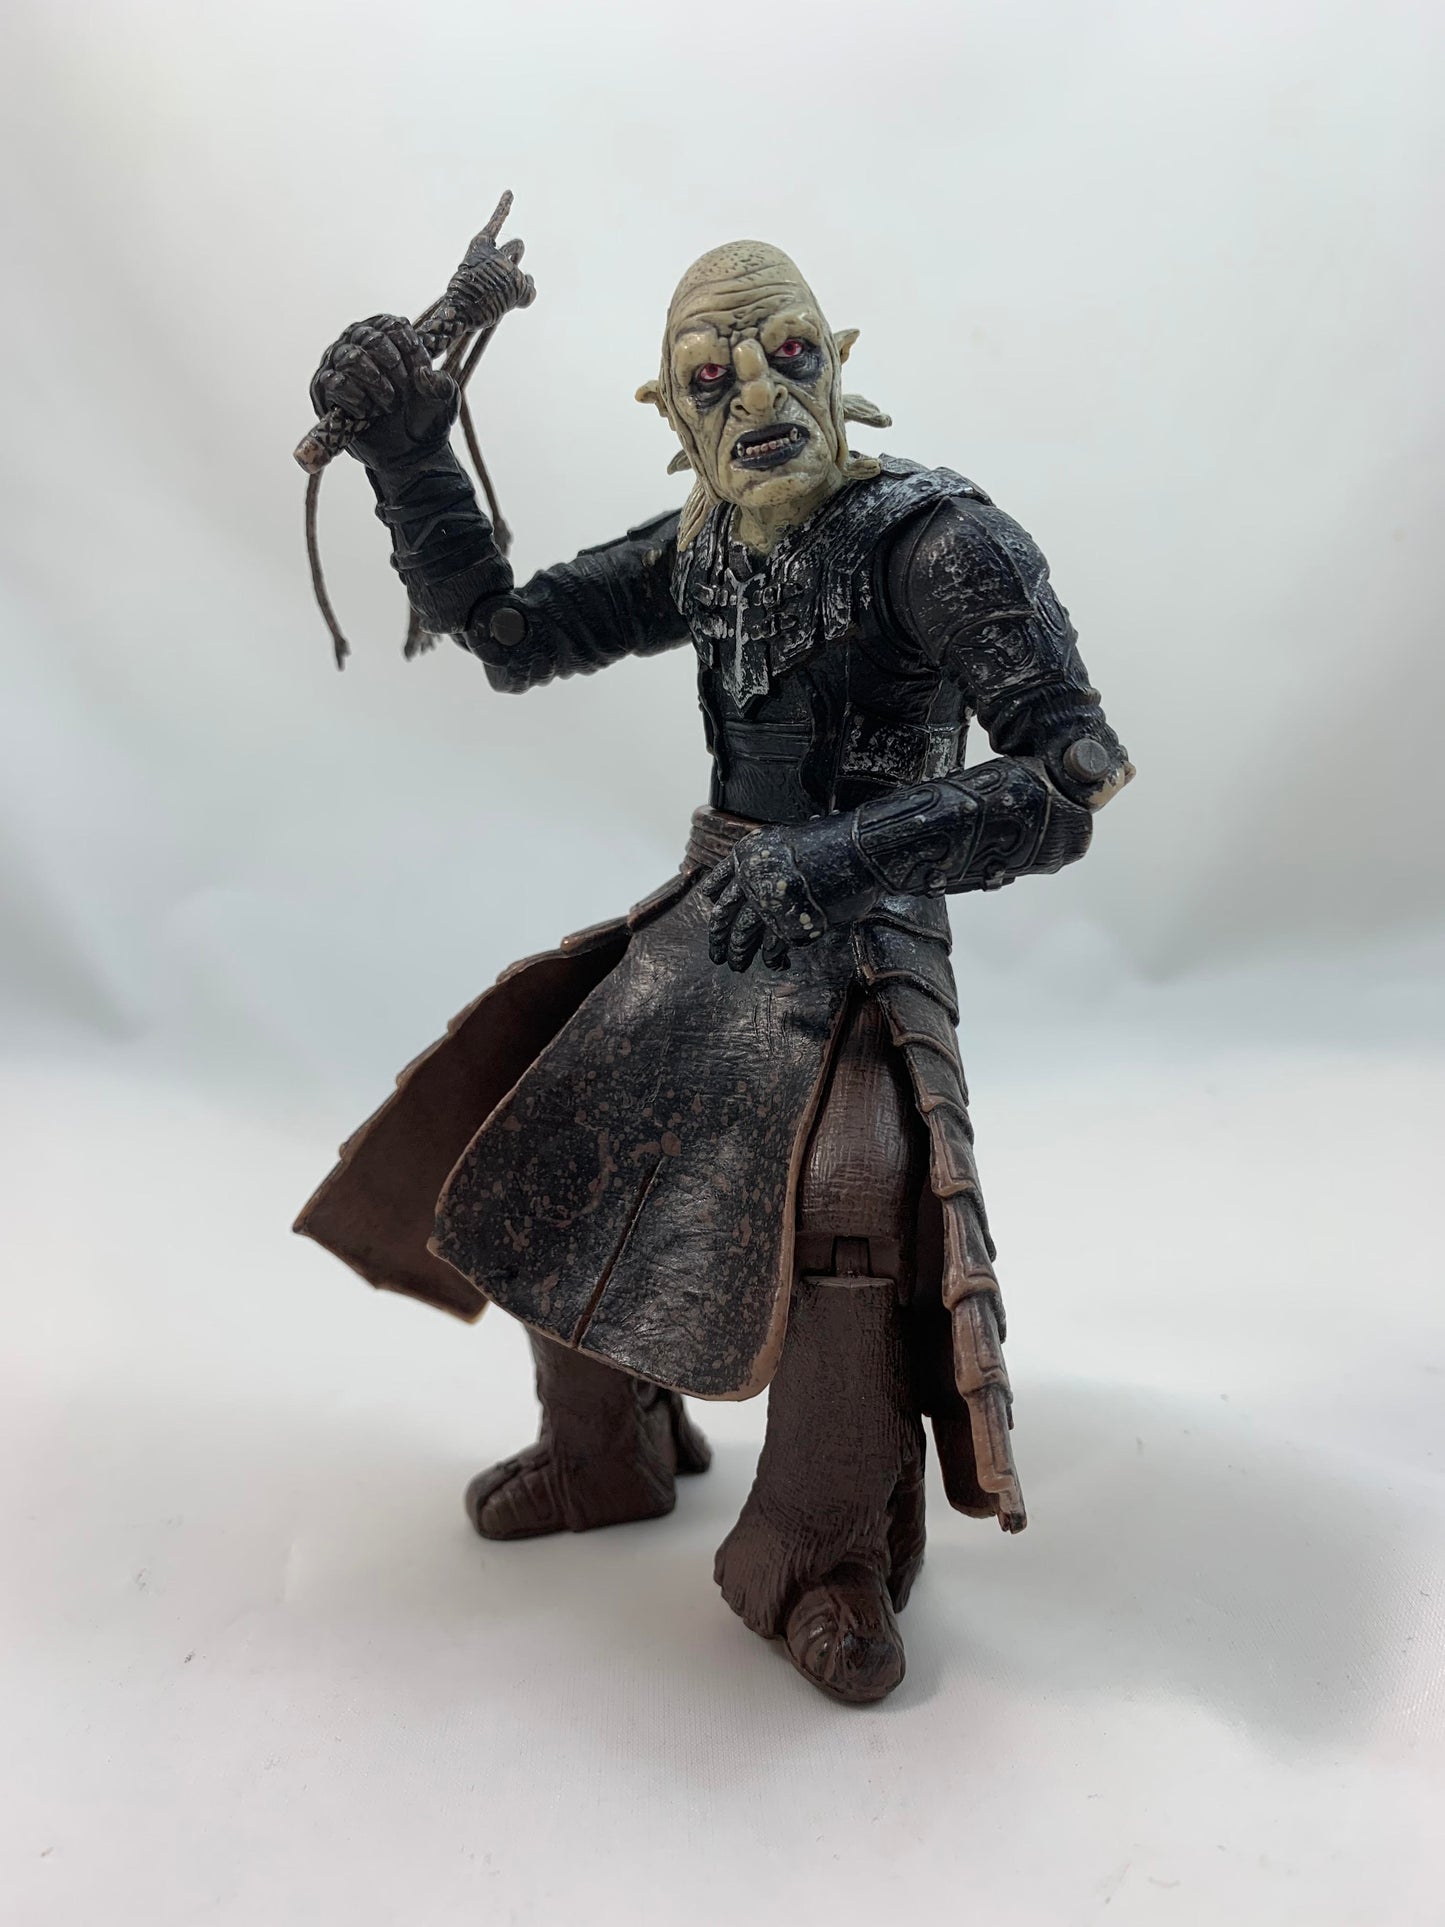 Toy Biz LORD OF THE RINGS MINT ORK OVERSEER - Loose